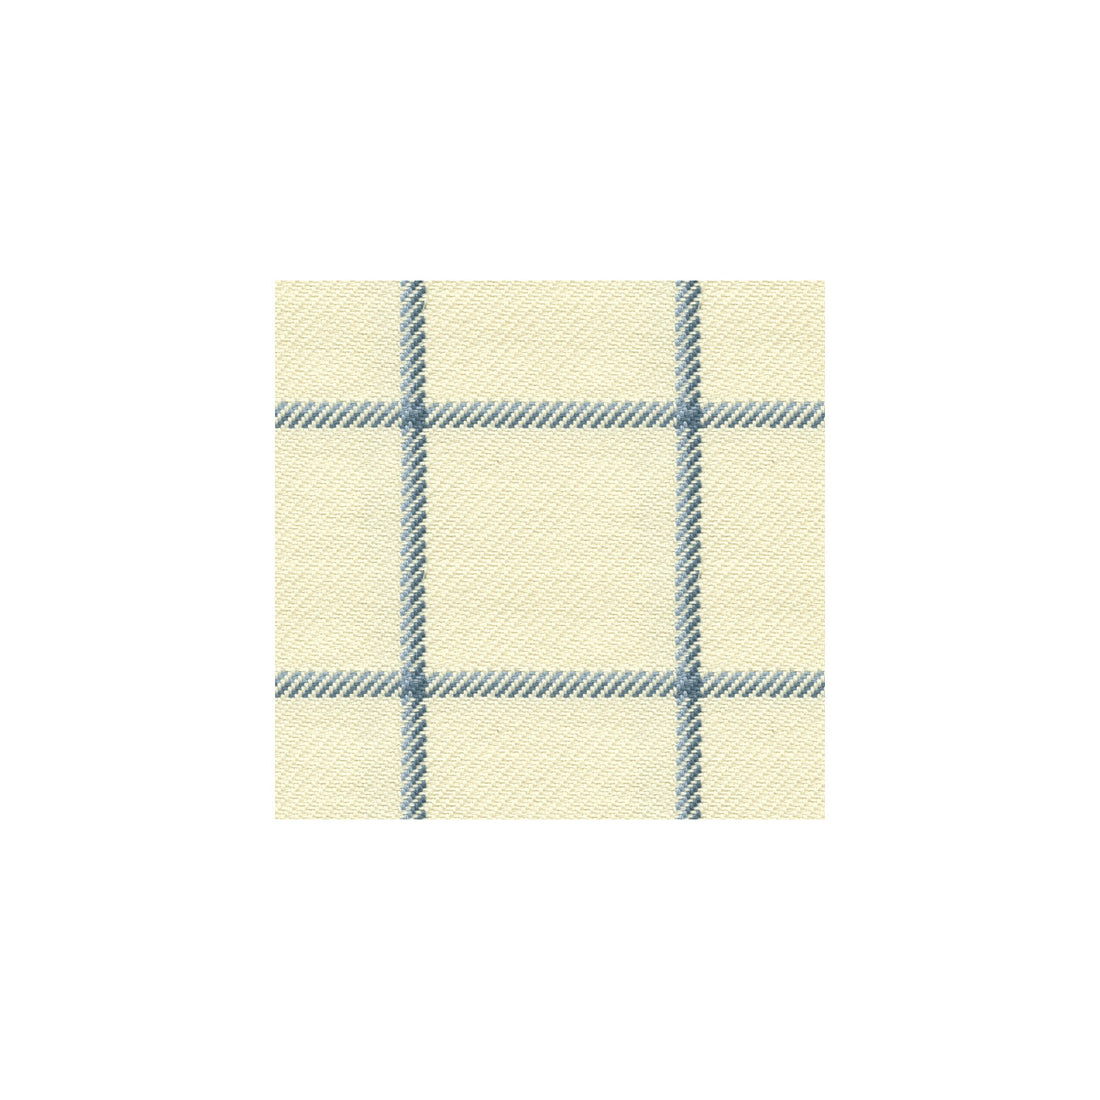 Harbord fabric in lake color - pattern 32994.515.0 - by Kravet Basics in the Sarah Richardson Affinity collection